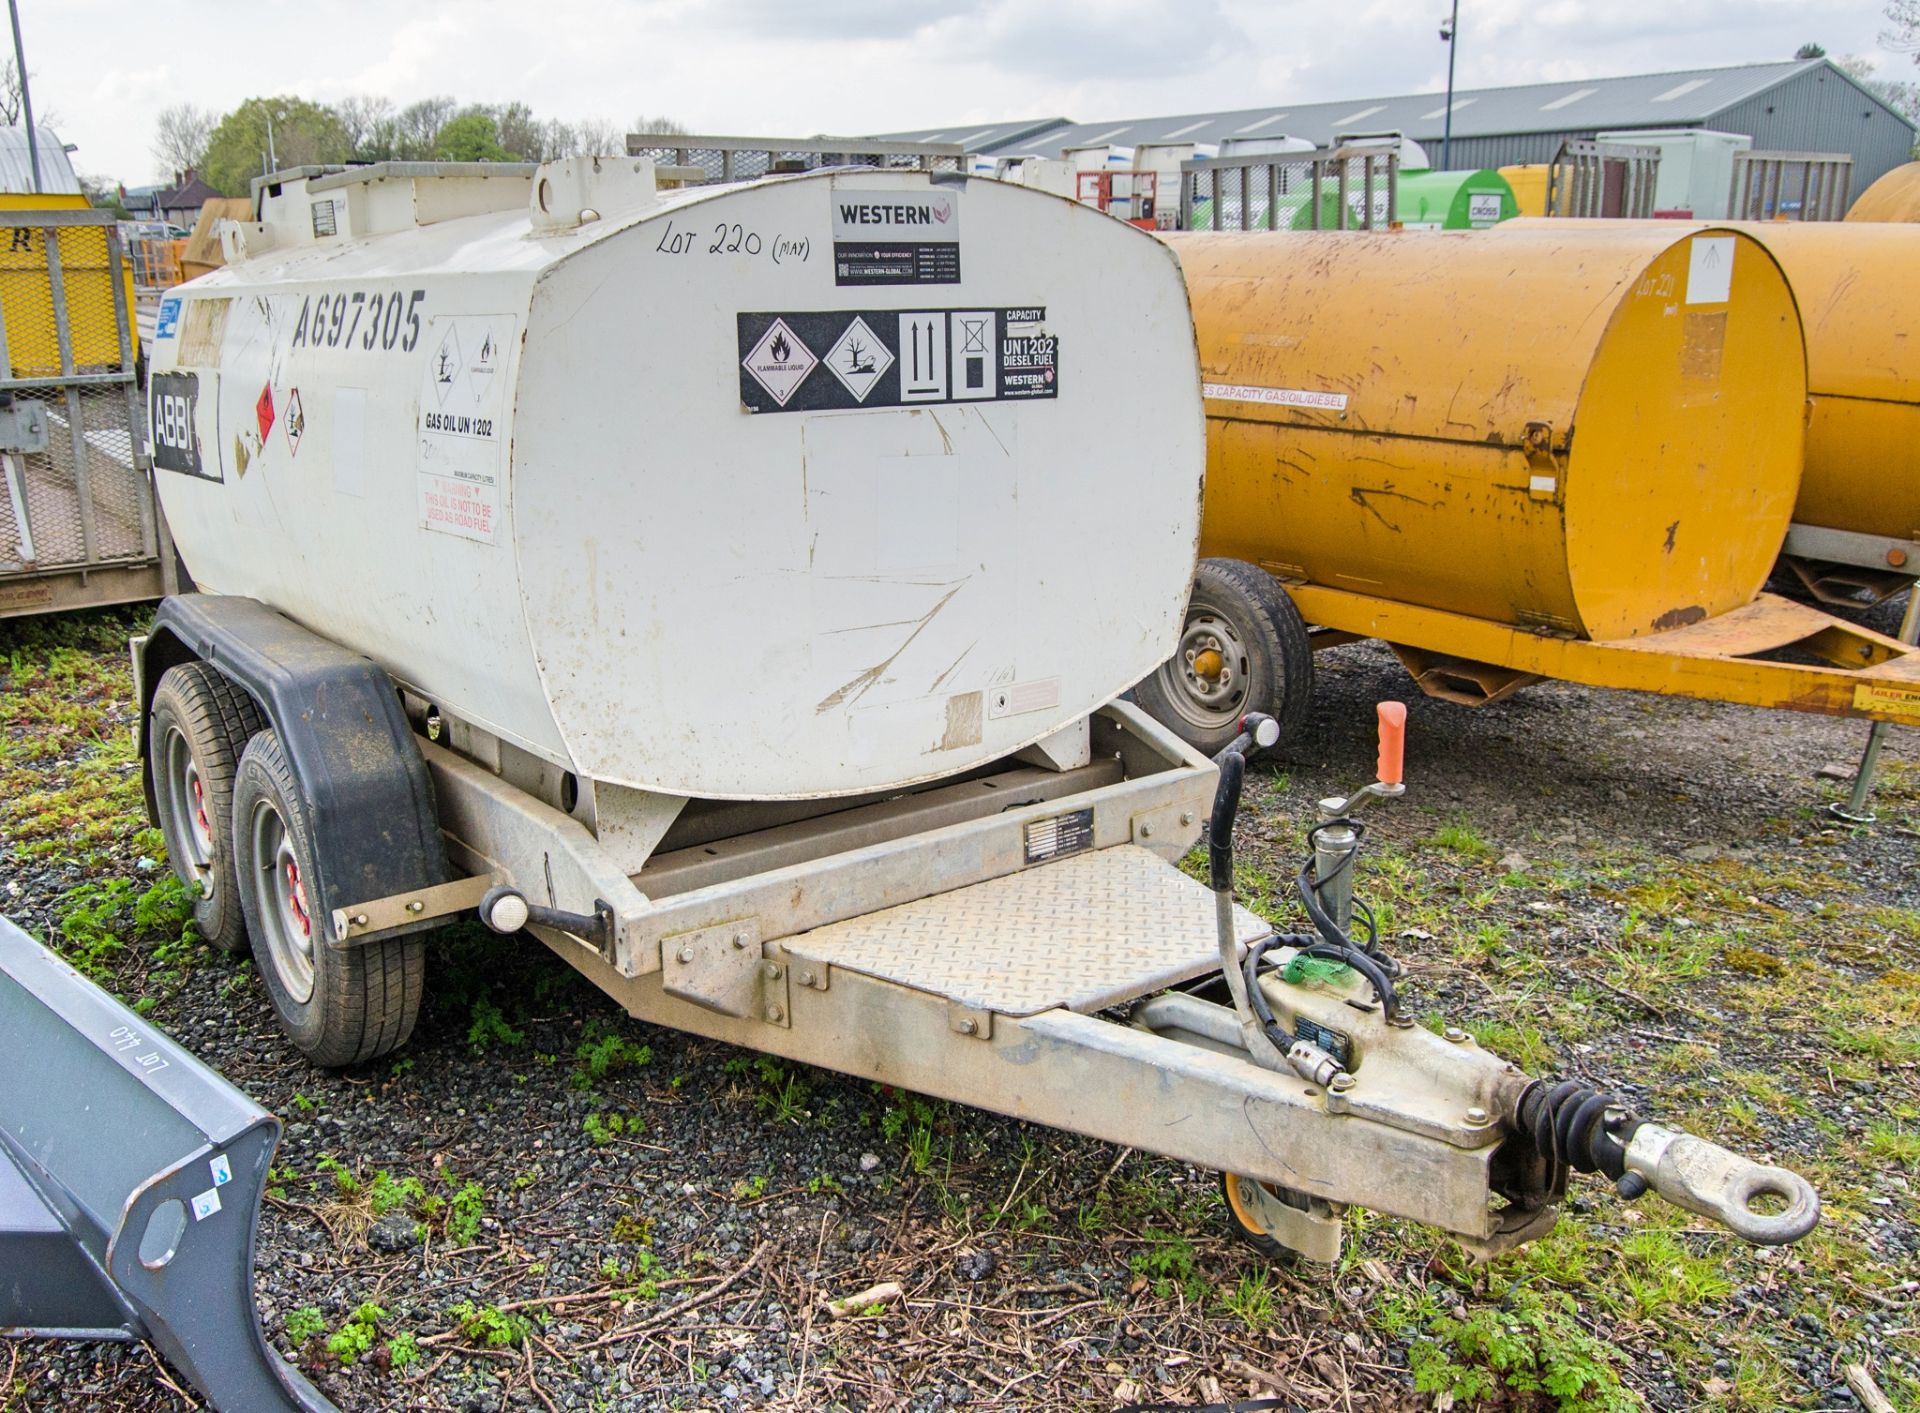 Western Abbi 200 litre tandem axle fast tow mobile bunded fuel bowser c/w manual pump, delivery hose - Image 2 of 7